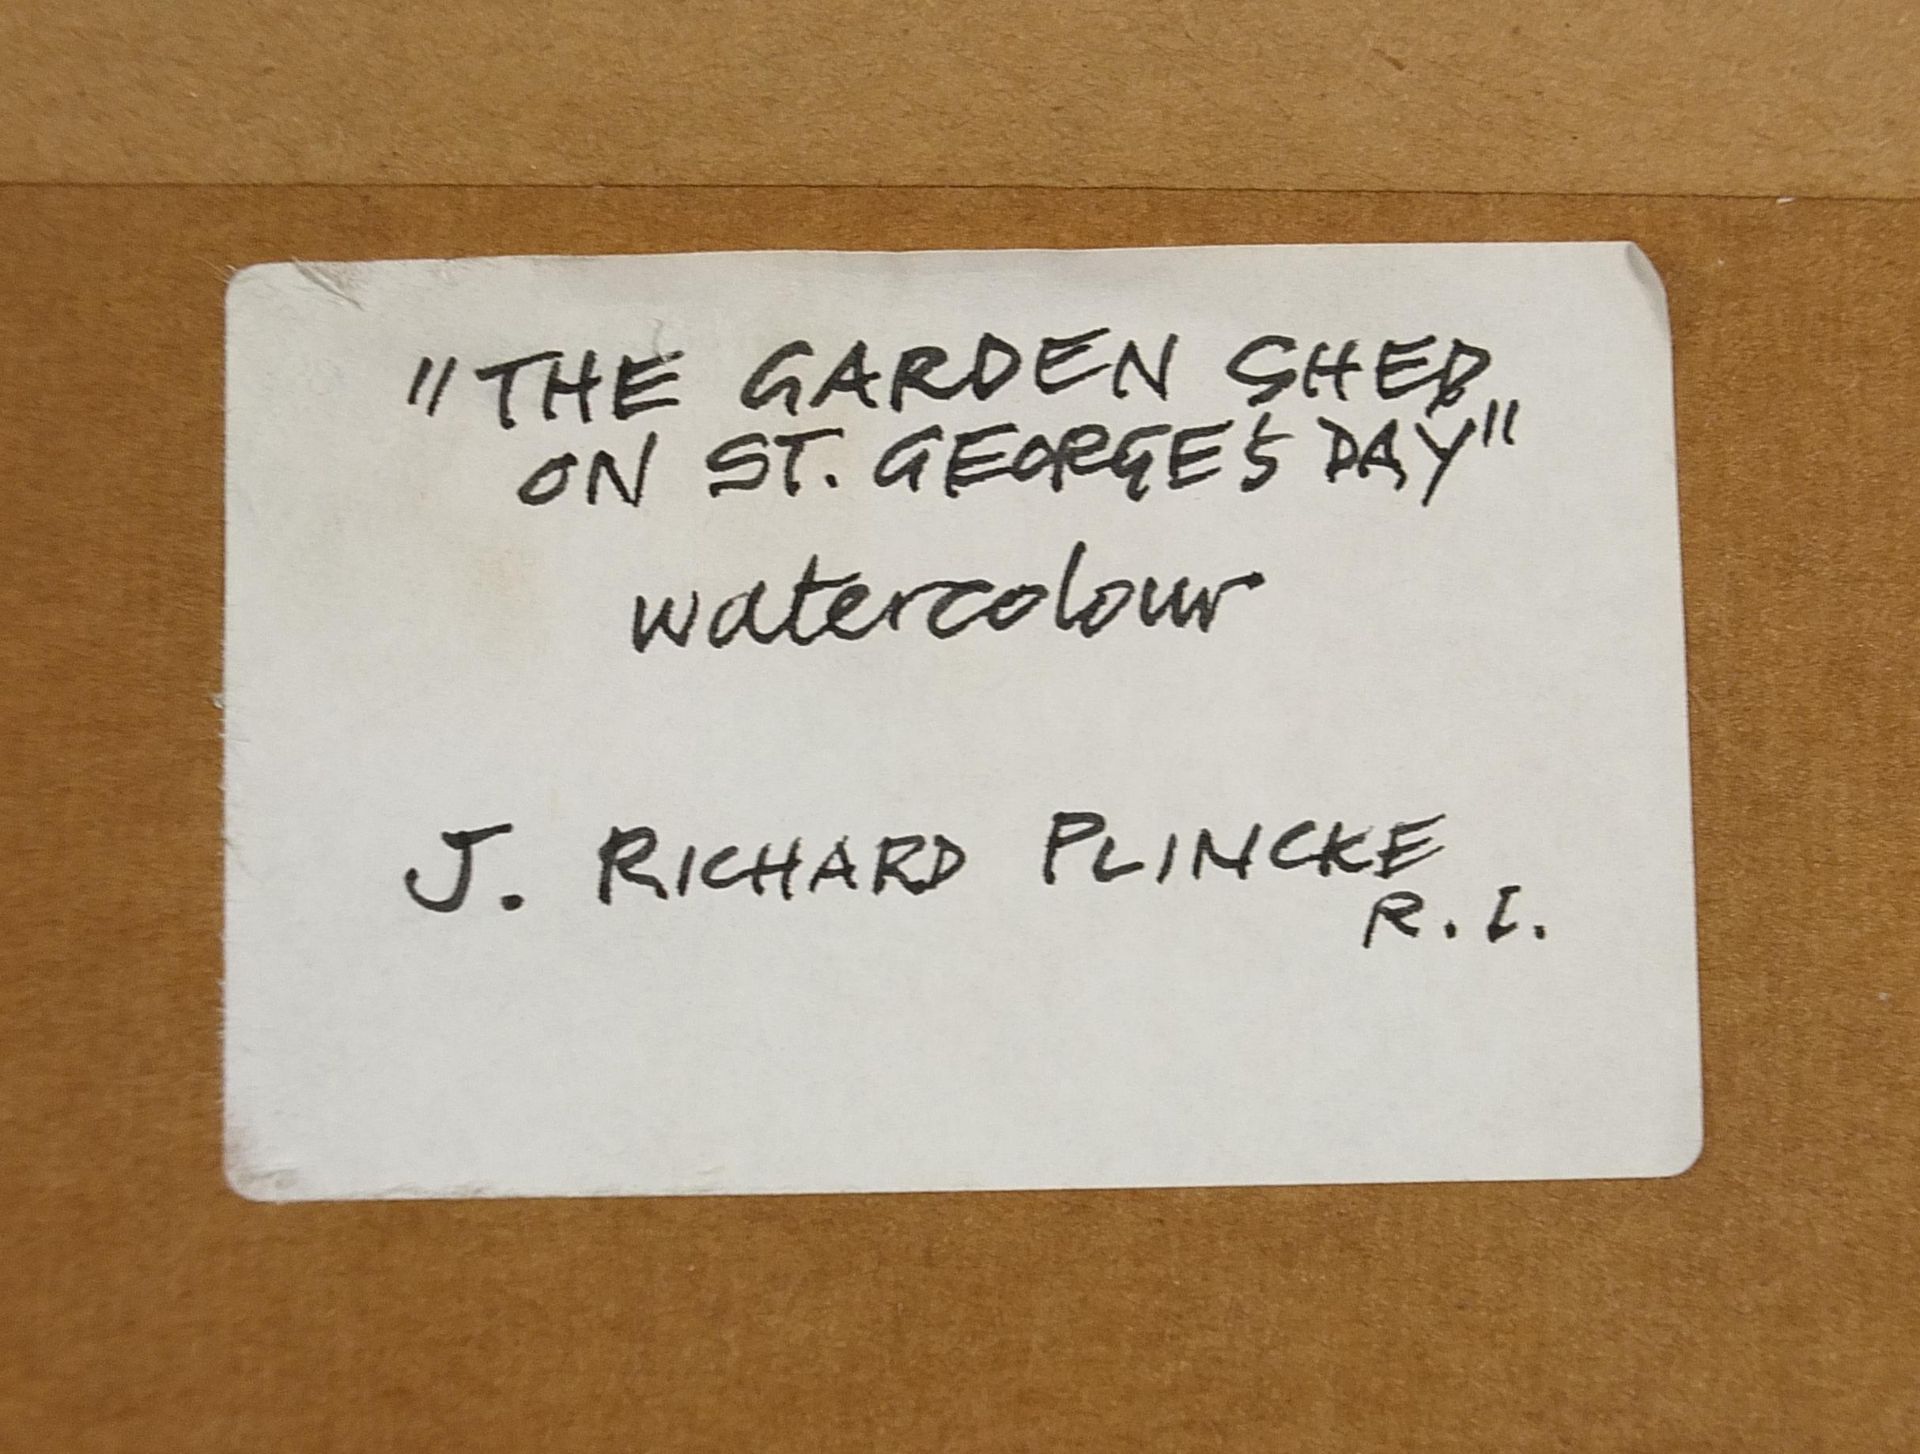 J Richard Plincke - The Garden Shed on St George's Day, monogrammed watercolour and acrylic, details - Image 4 of 4